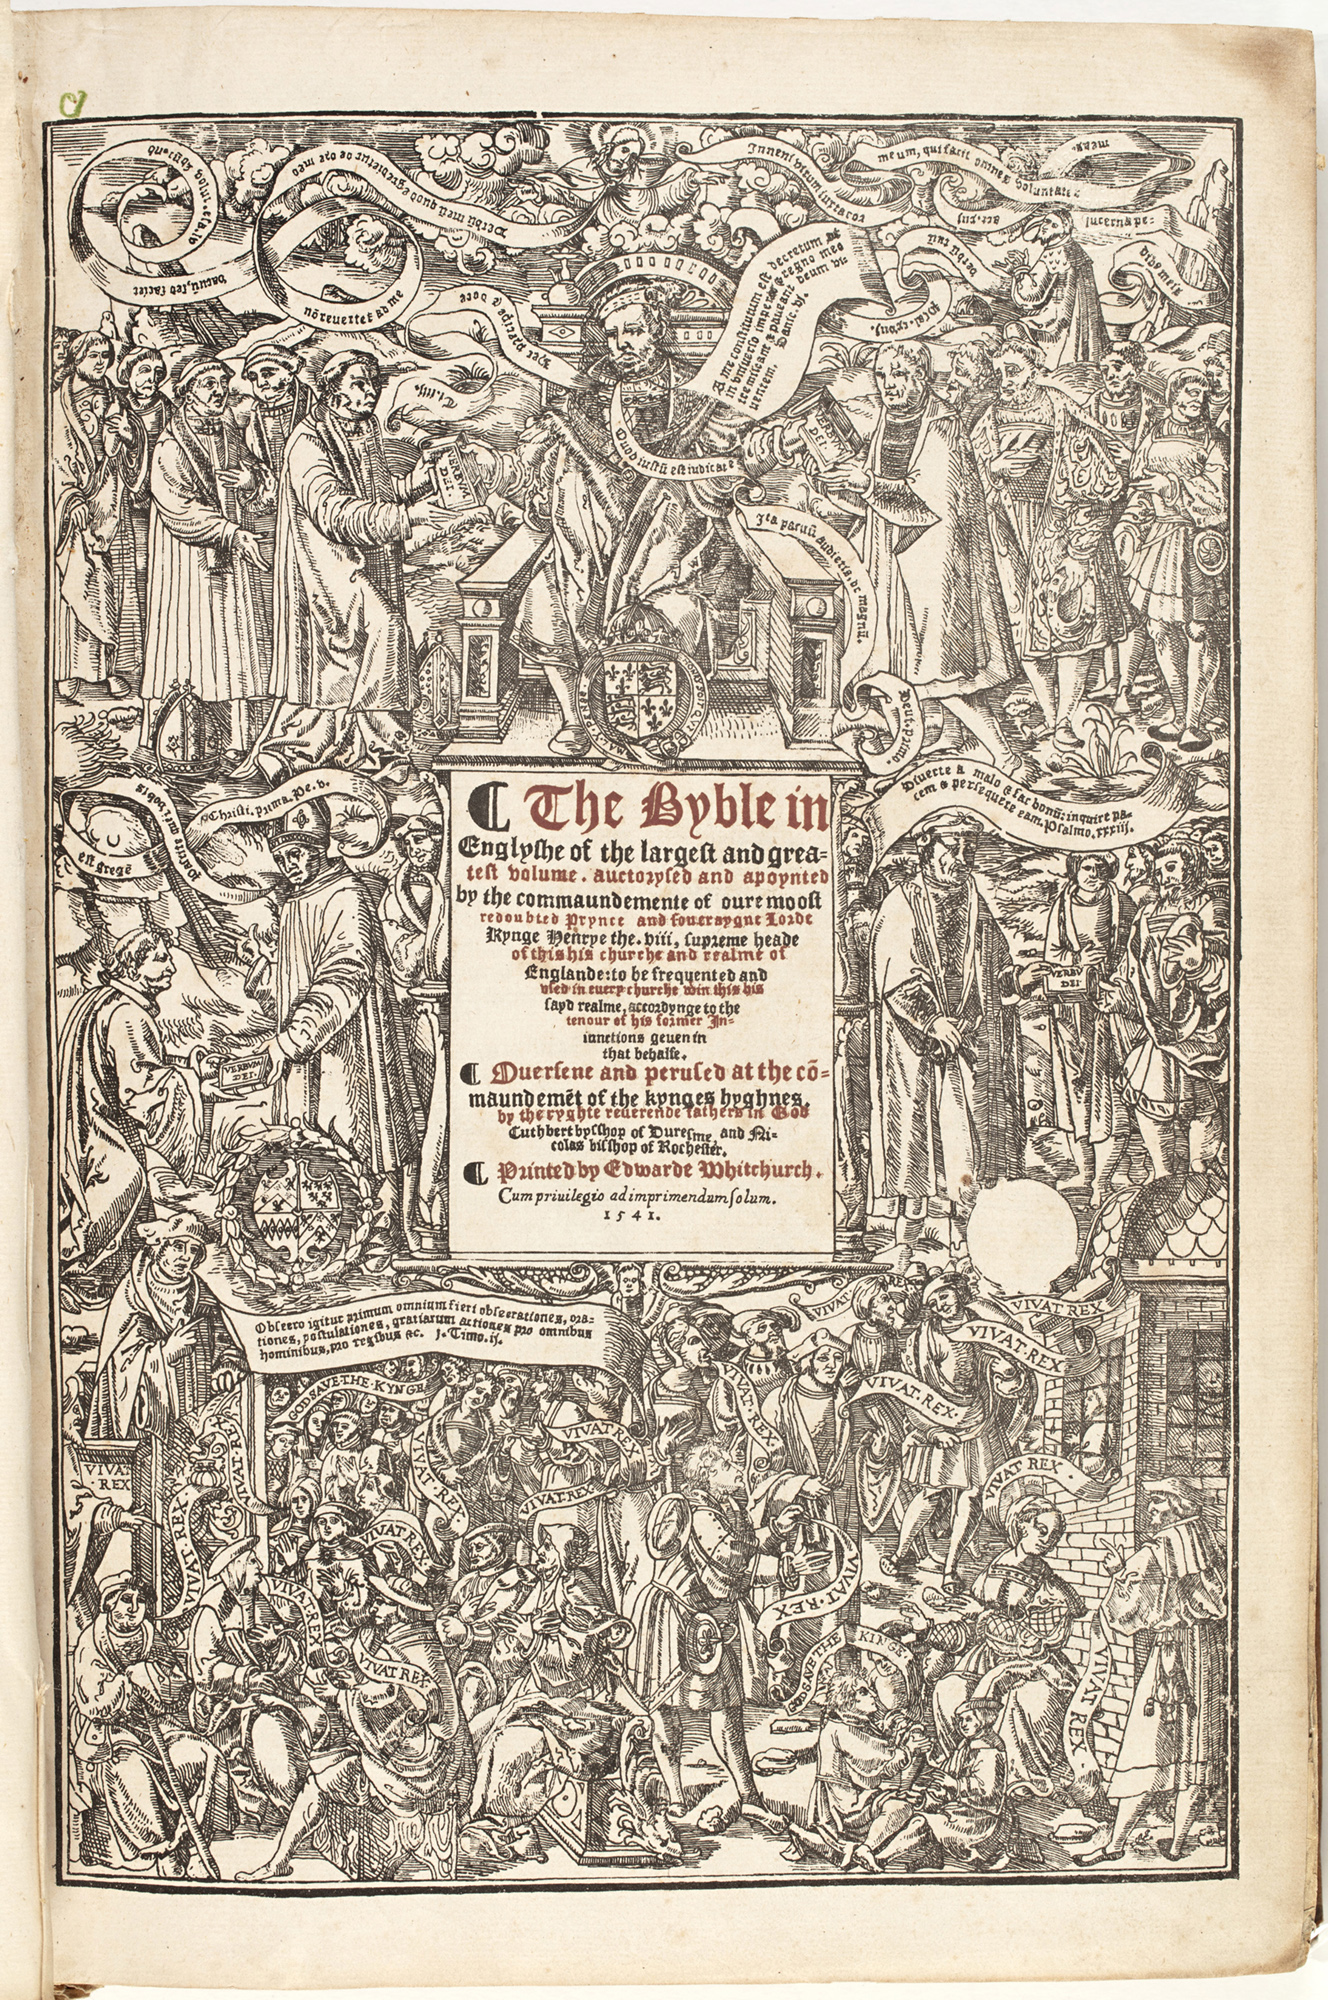 The Byble in Englyshe of the largest and greatest volume, auctorysed and apoynted by the commaundemente of oure moost redoubted Prynce, 1541